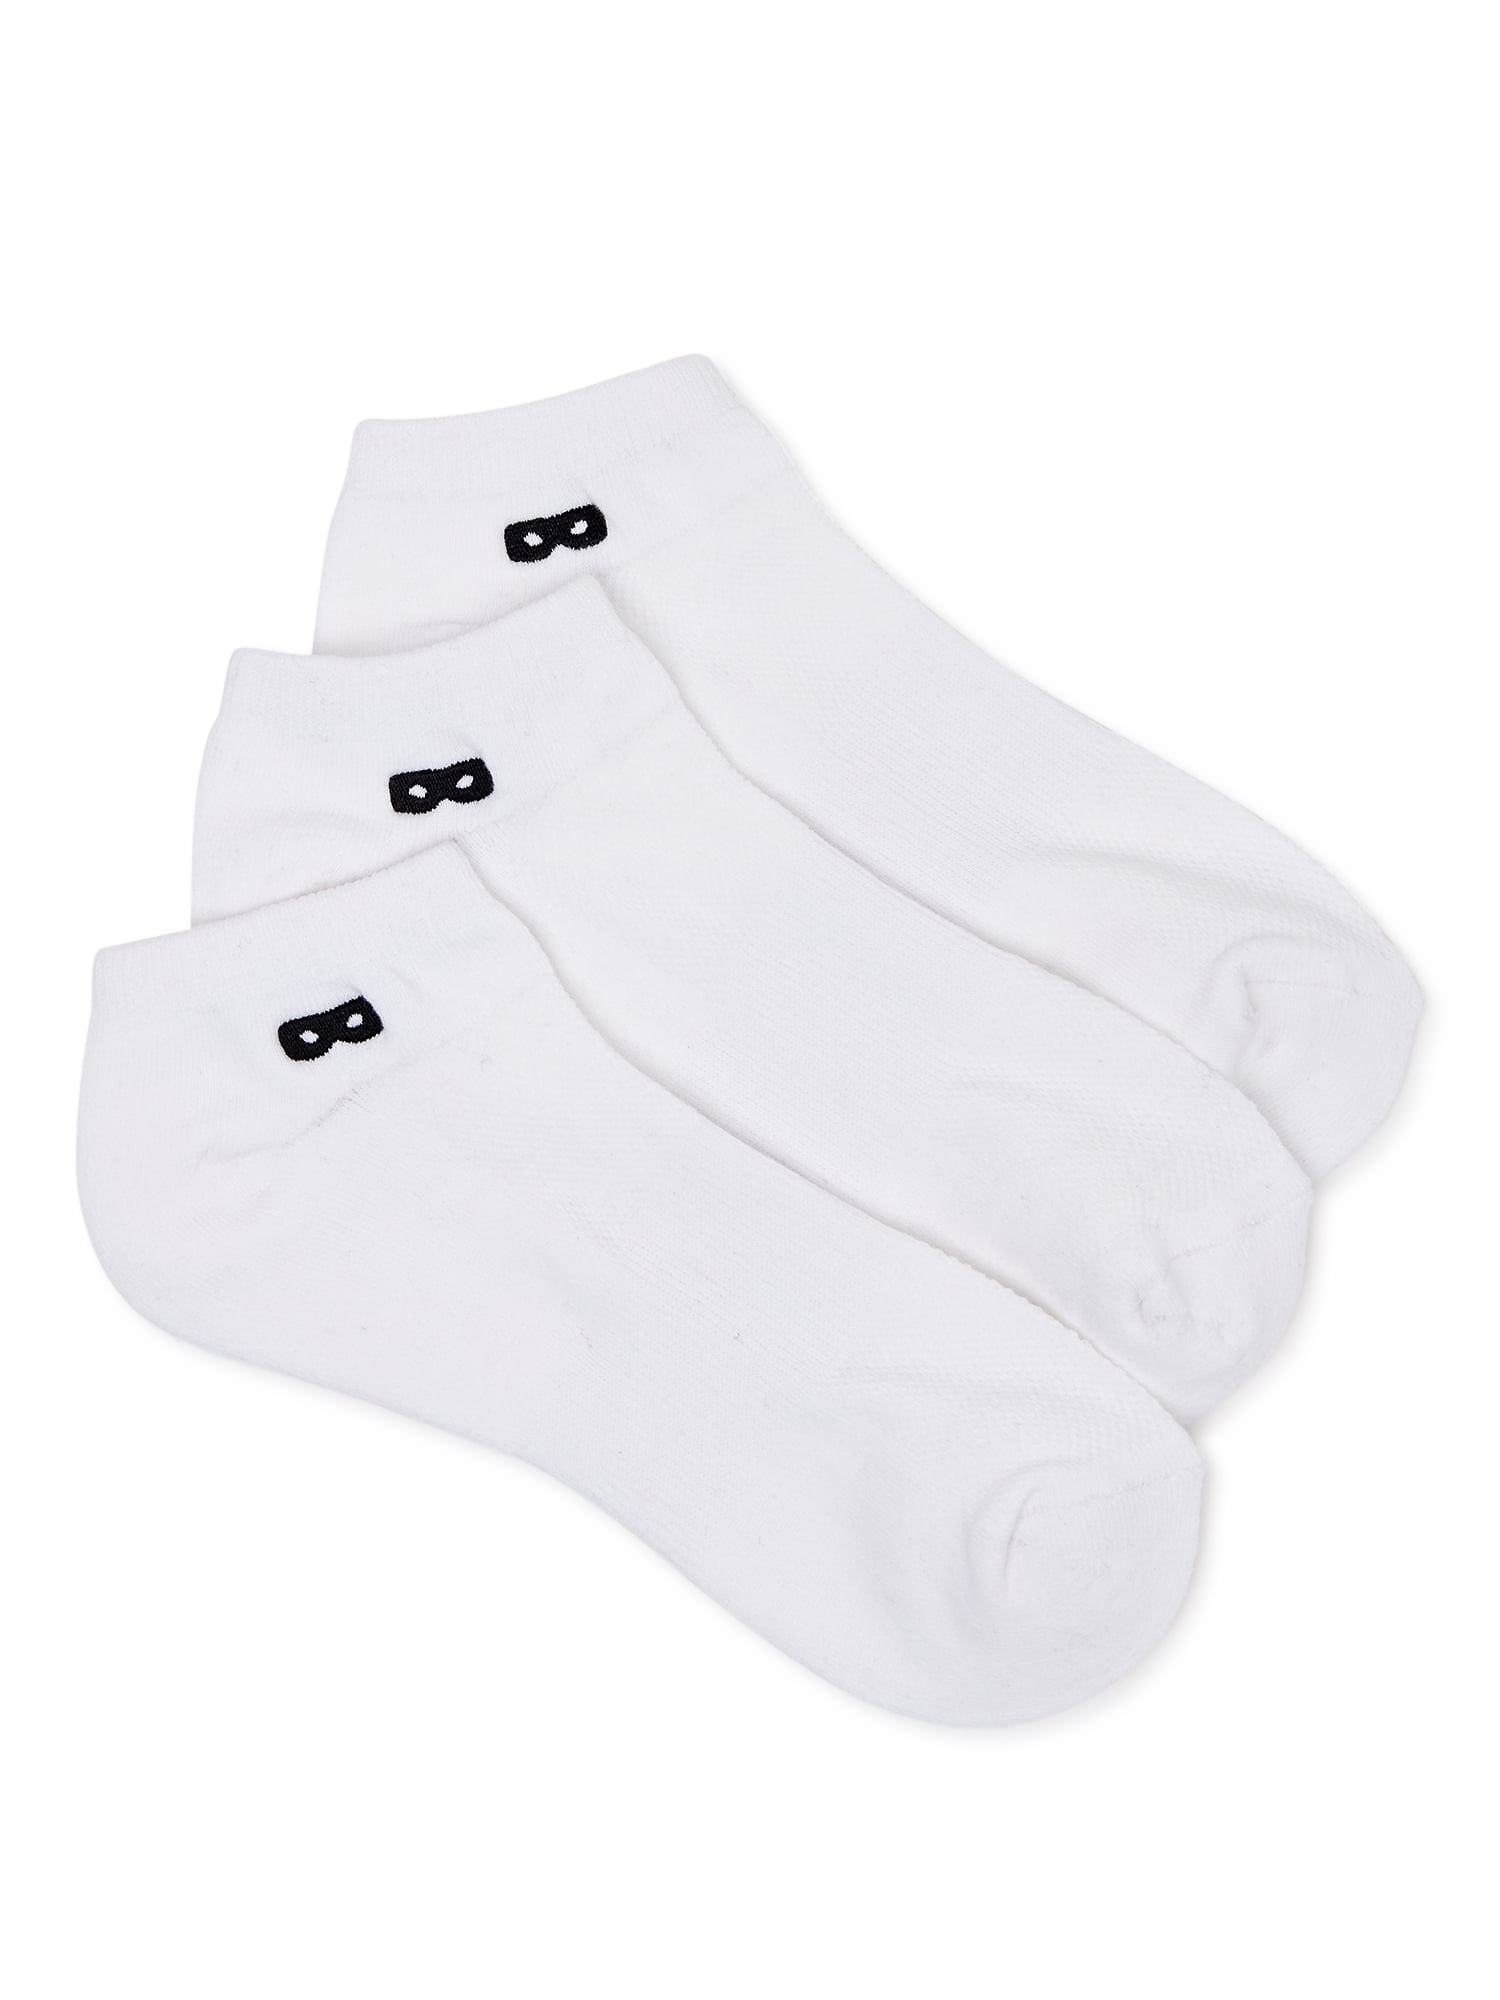 Pair of Thieves Blackout/Whiteout Cushioned Low Cut Socks, 3-Pack